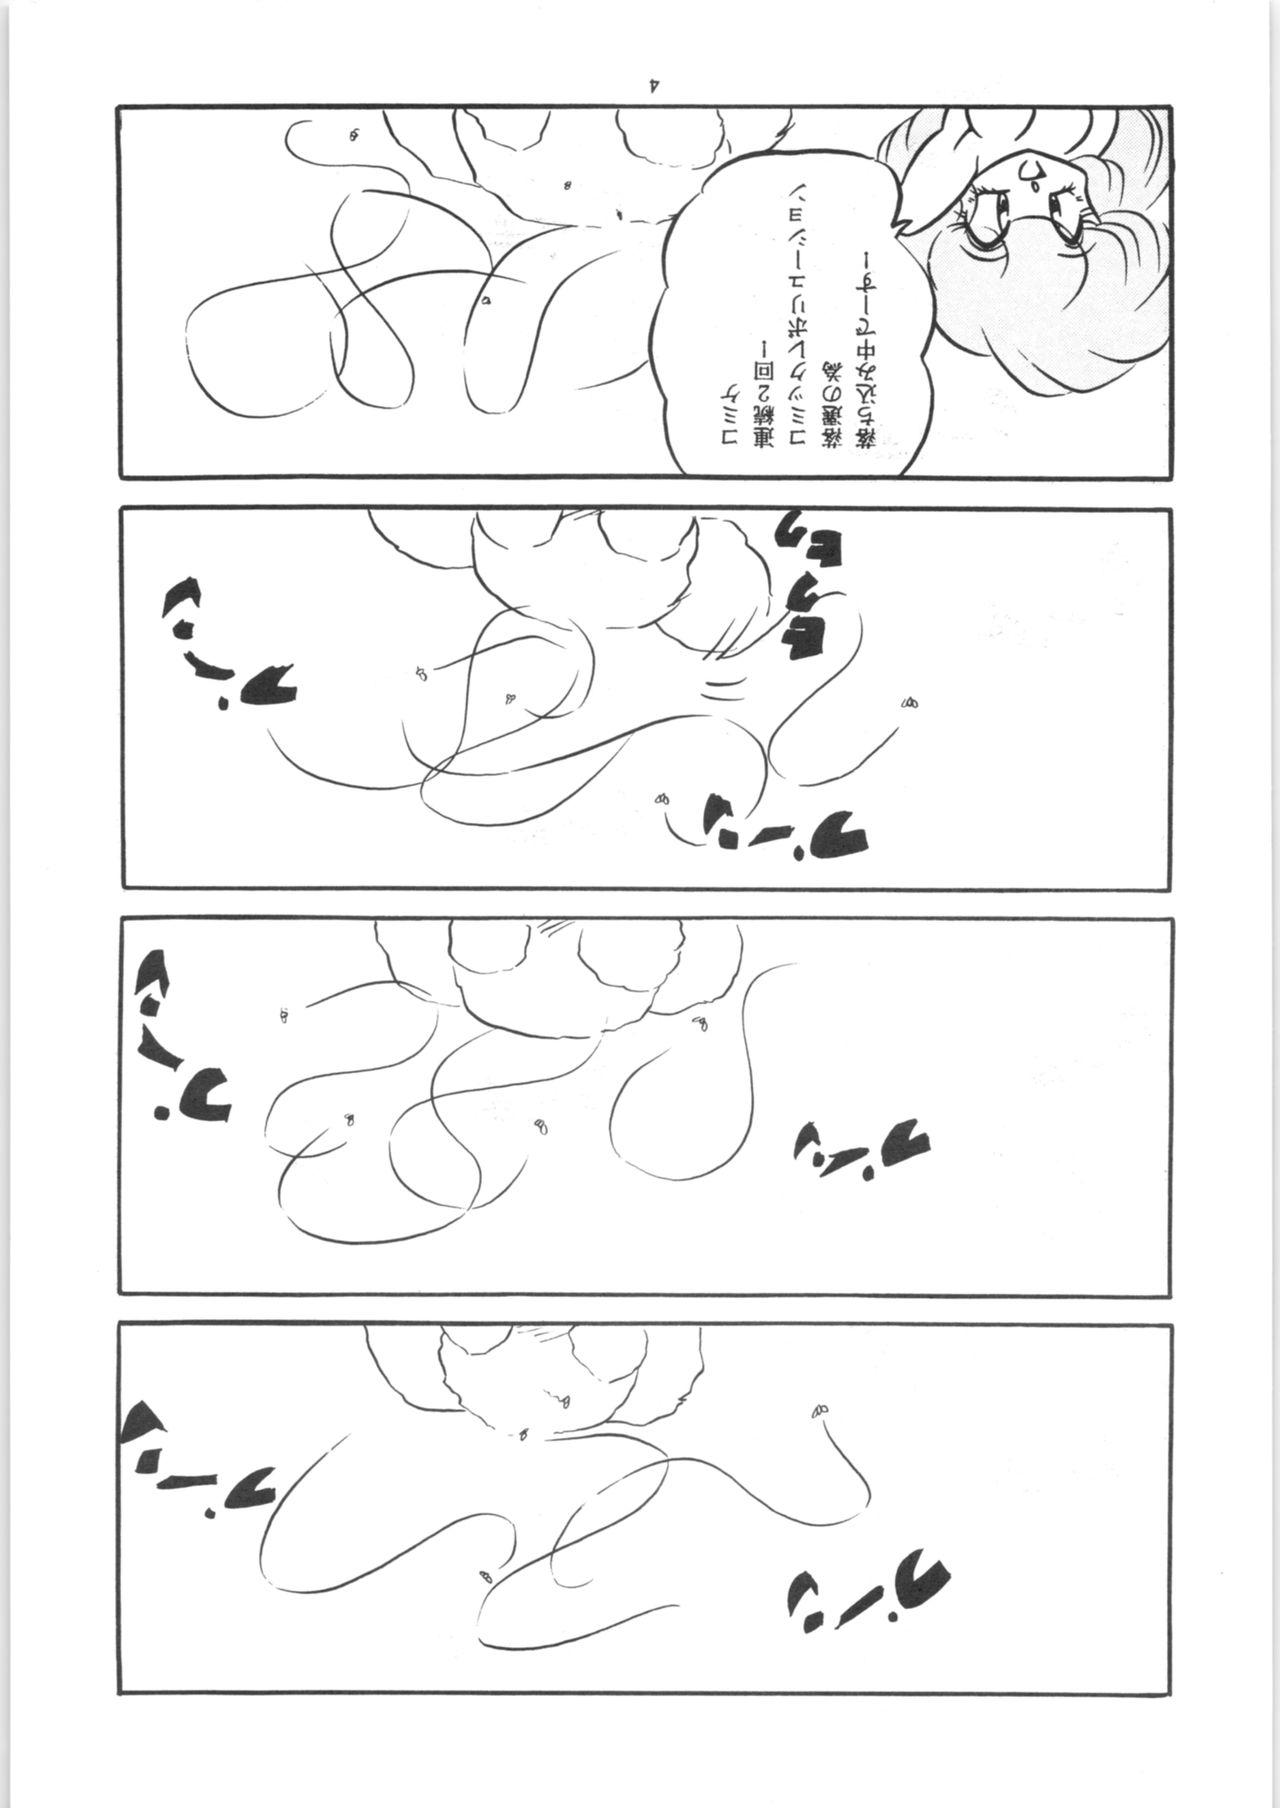 Blackdick C-COMPANY SPECIAL STAGE 18 - Ranma 12 Idol project Sex Pussy - Page 4